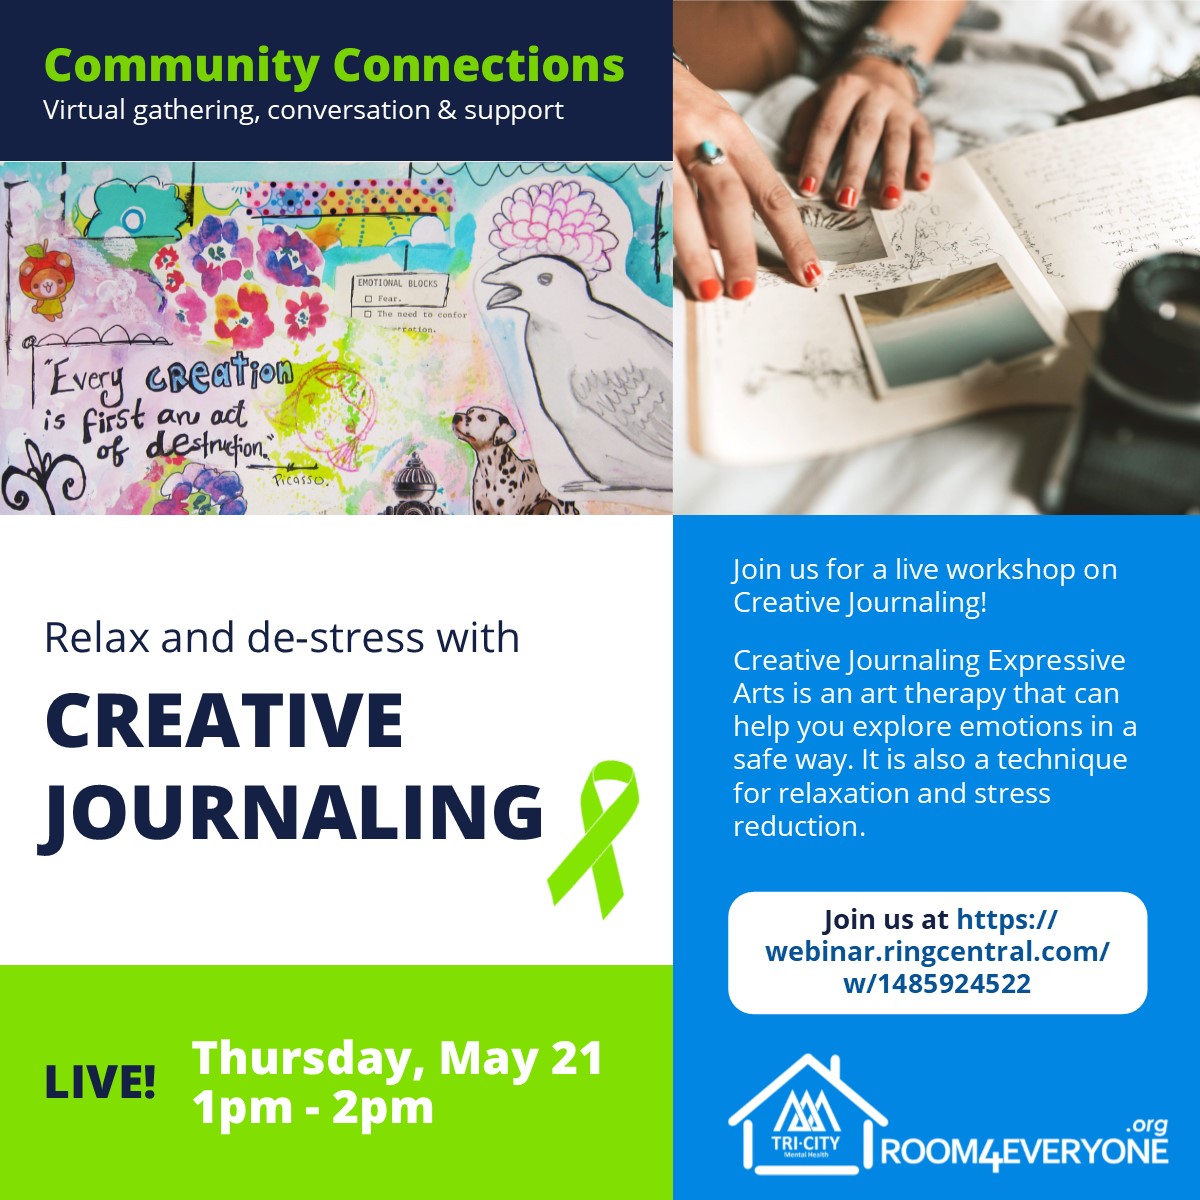 Community Connections creative journaling